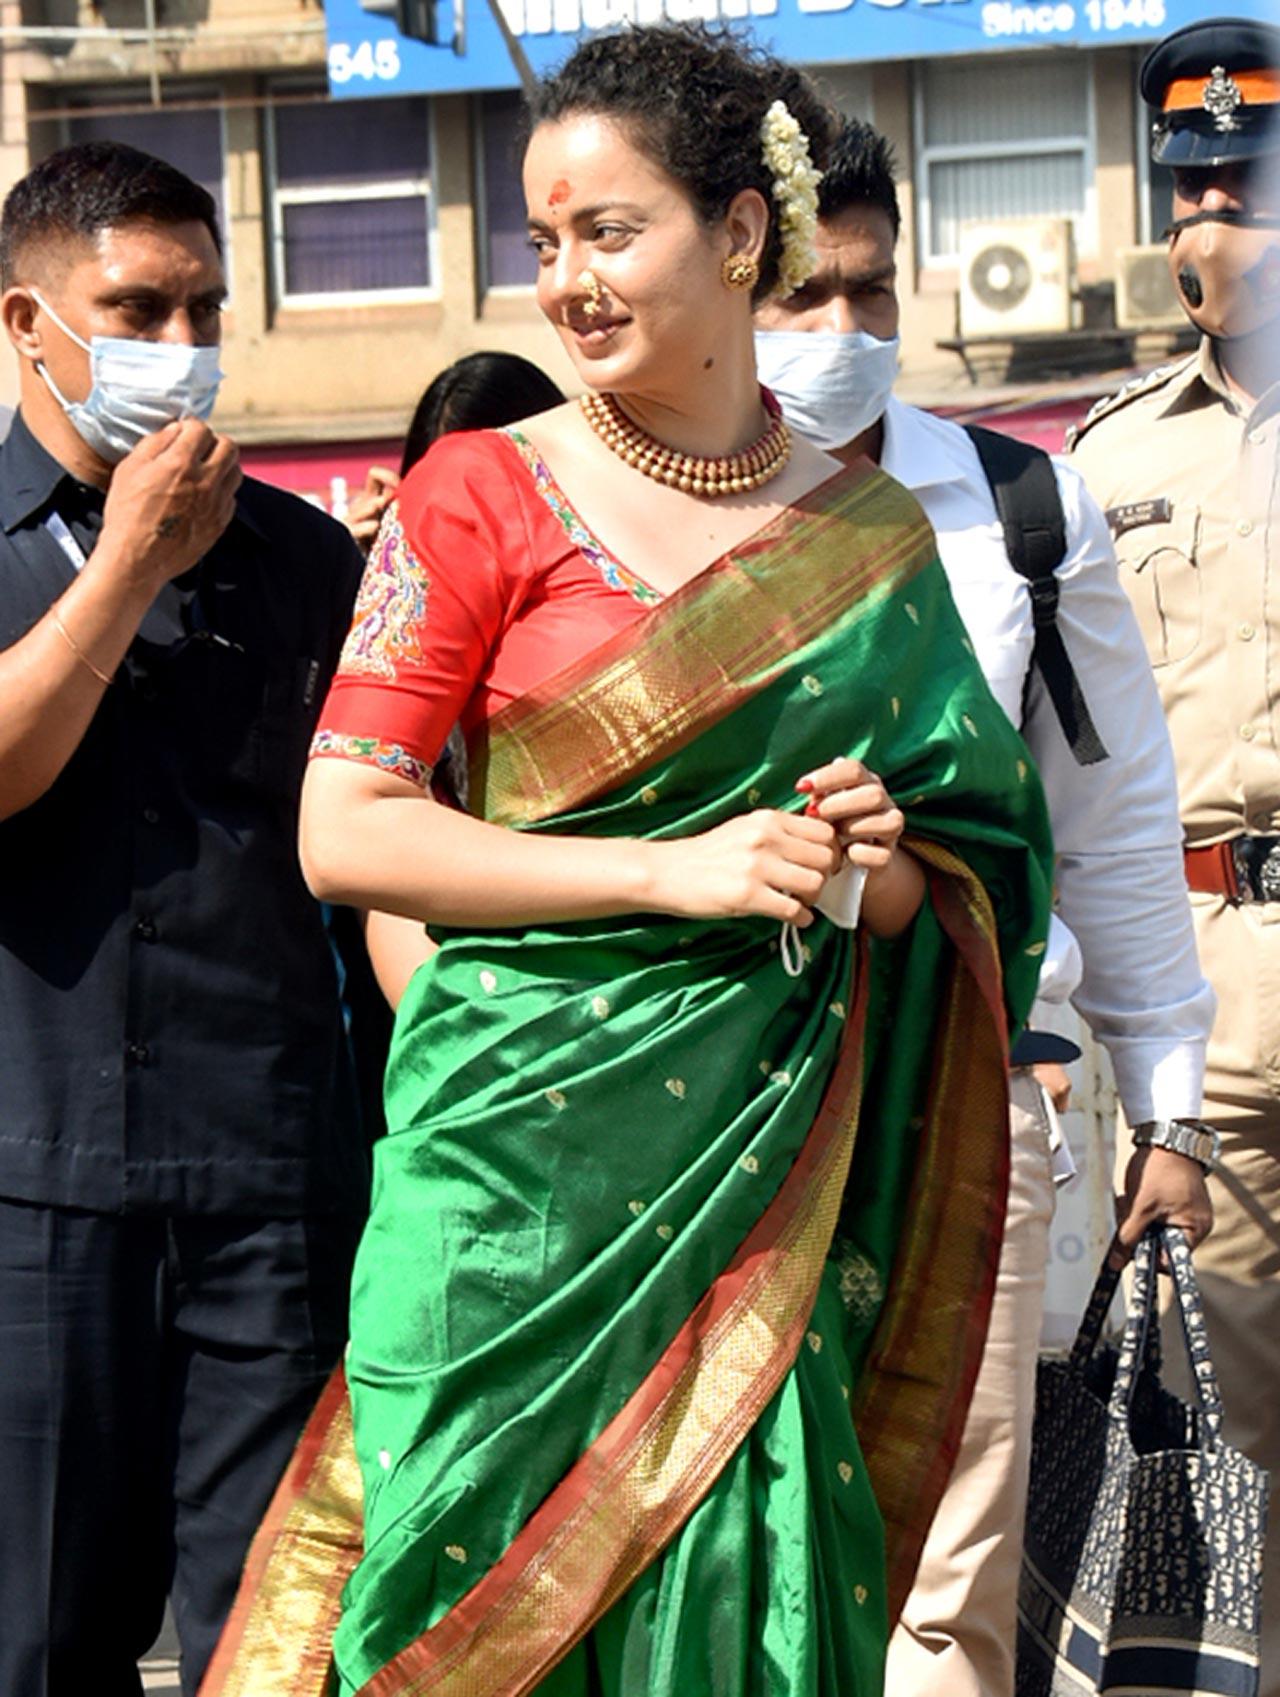 Kangana Ranaut on Tuesday visited the famous Mumba Devi temple and Siddhivinayak Temple in Mumbai. Kangana looked pretty in her green coloured silk saree as she was clicked at Siddhivinayak Temple in Prabhadevi.